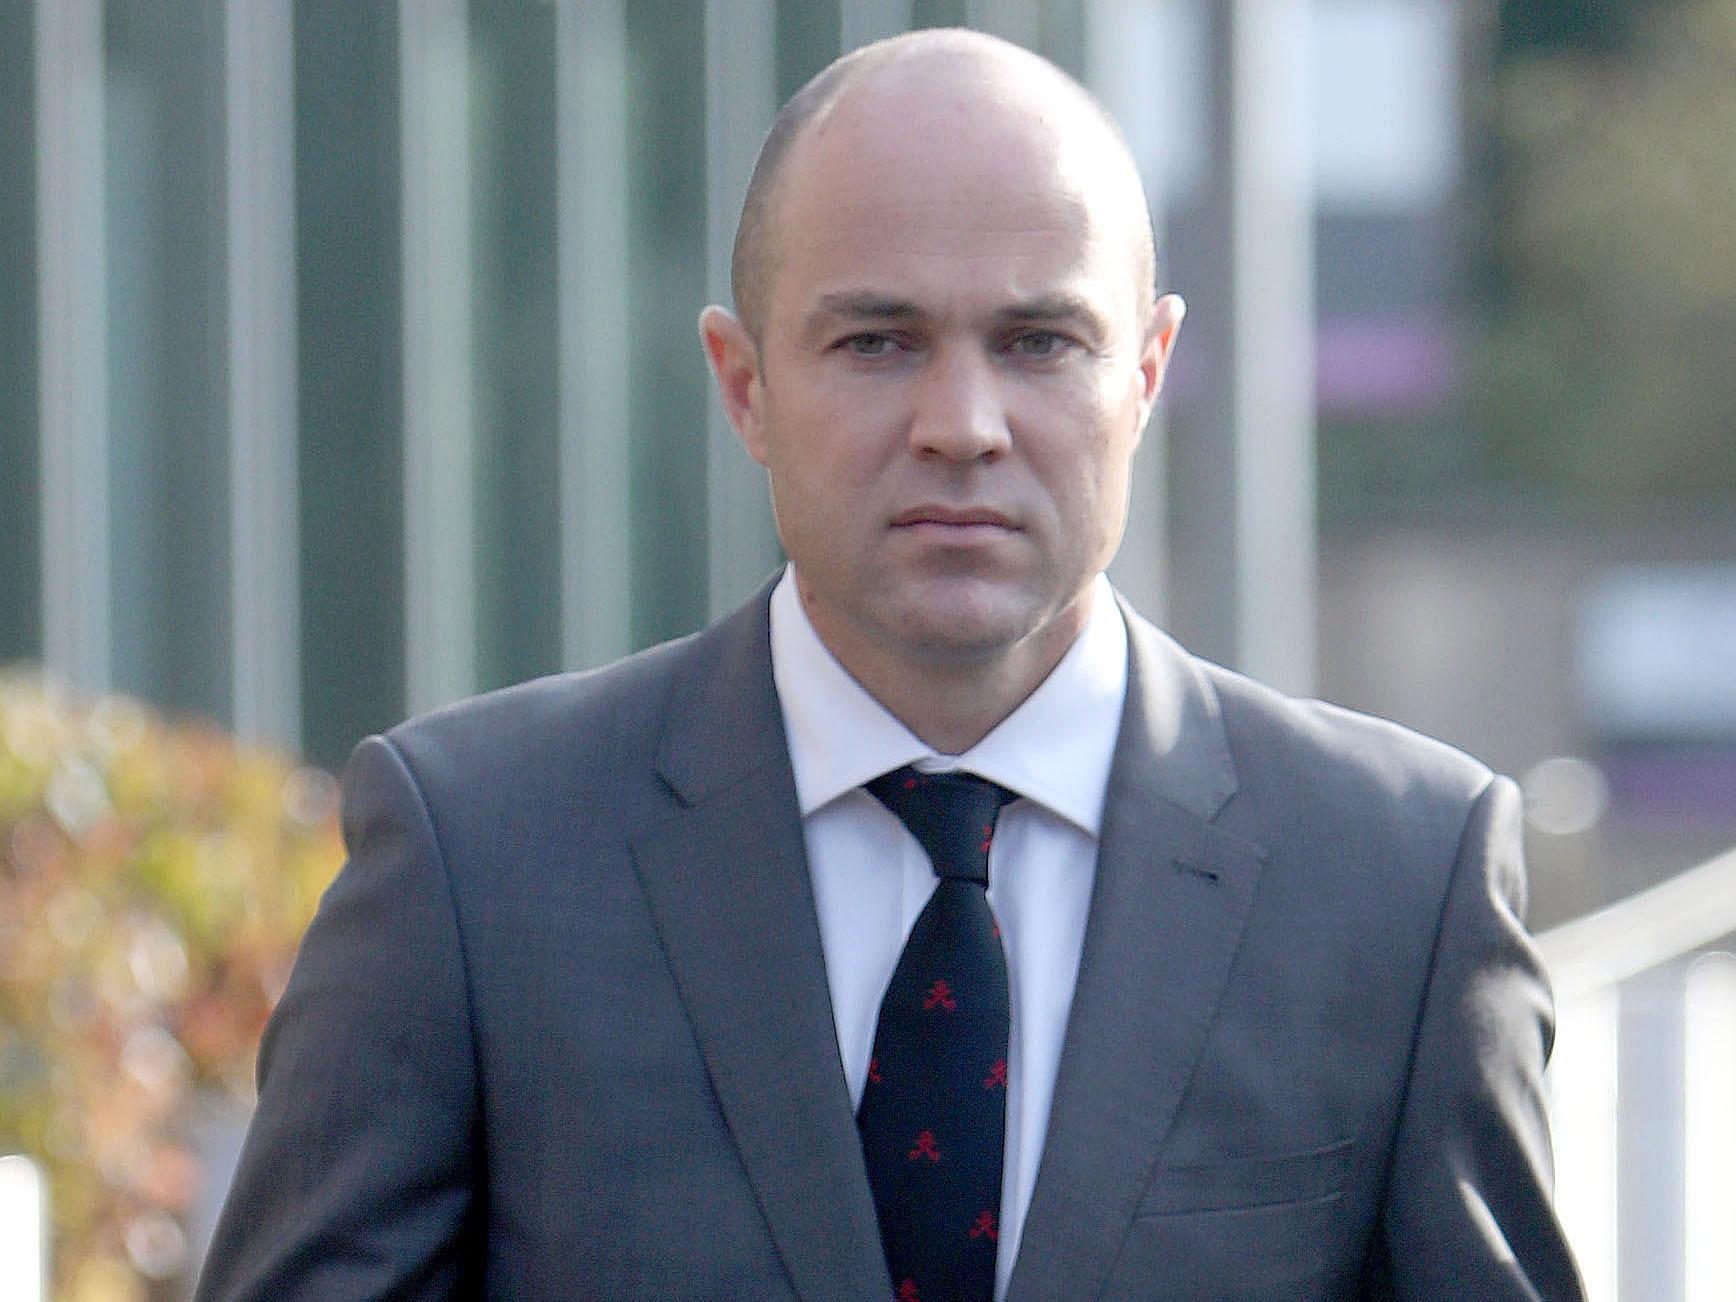 Emile Cilliers was said to be 'unemotional' after the accident